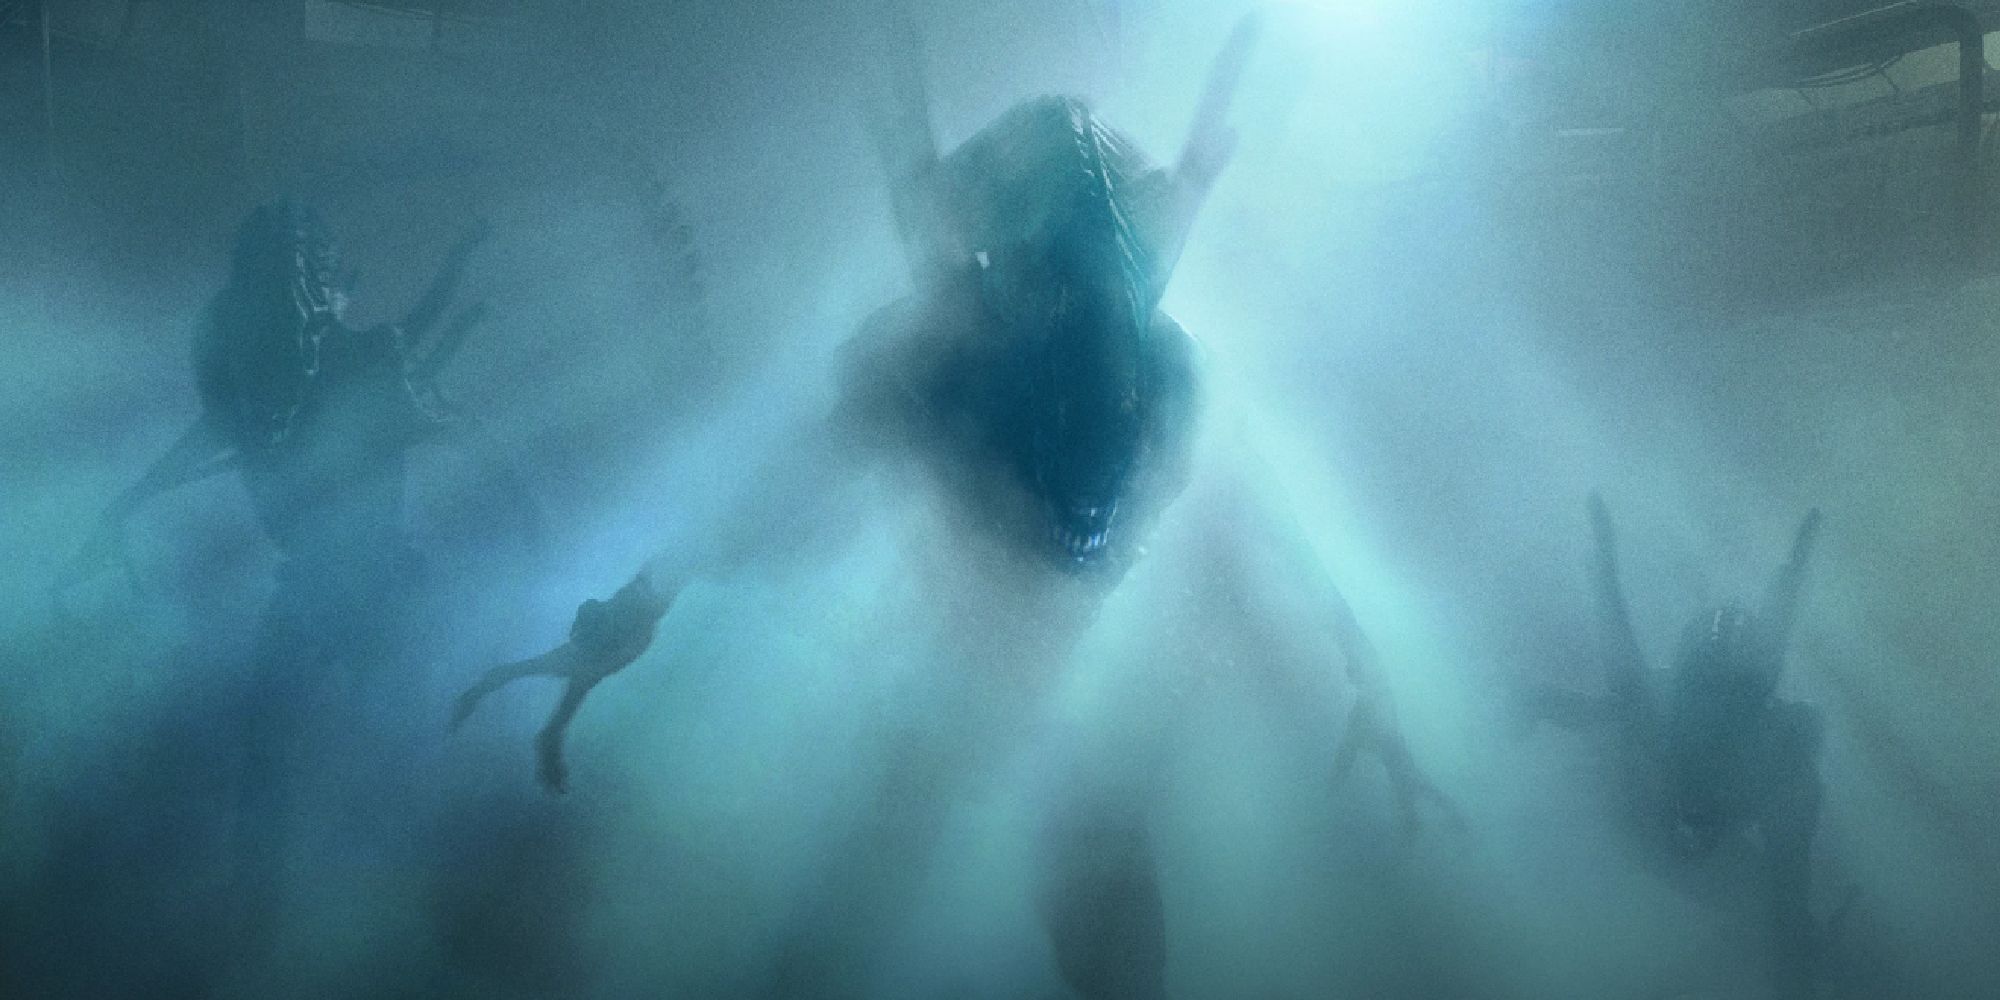 3 Xenomorphs coming out of some fog